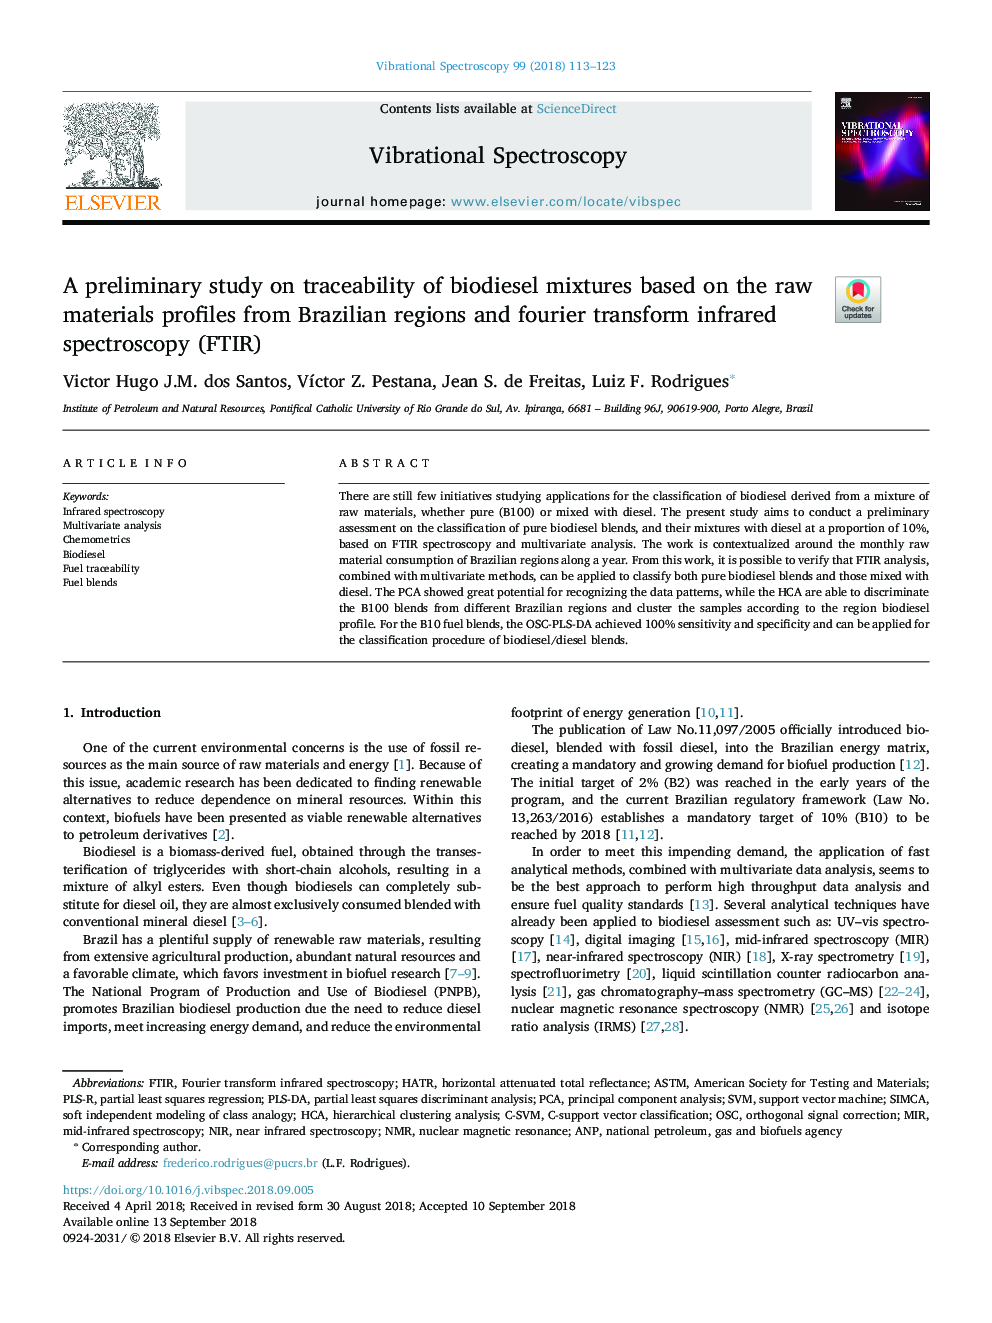 A preliminary study on traceability of biodiesel mixtures based on the raw materials profiles from Brazilian regions and fourier transform infrared spectroscopy (FTIR)